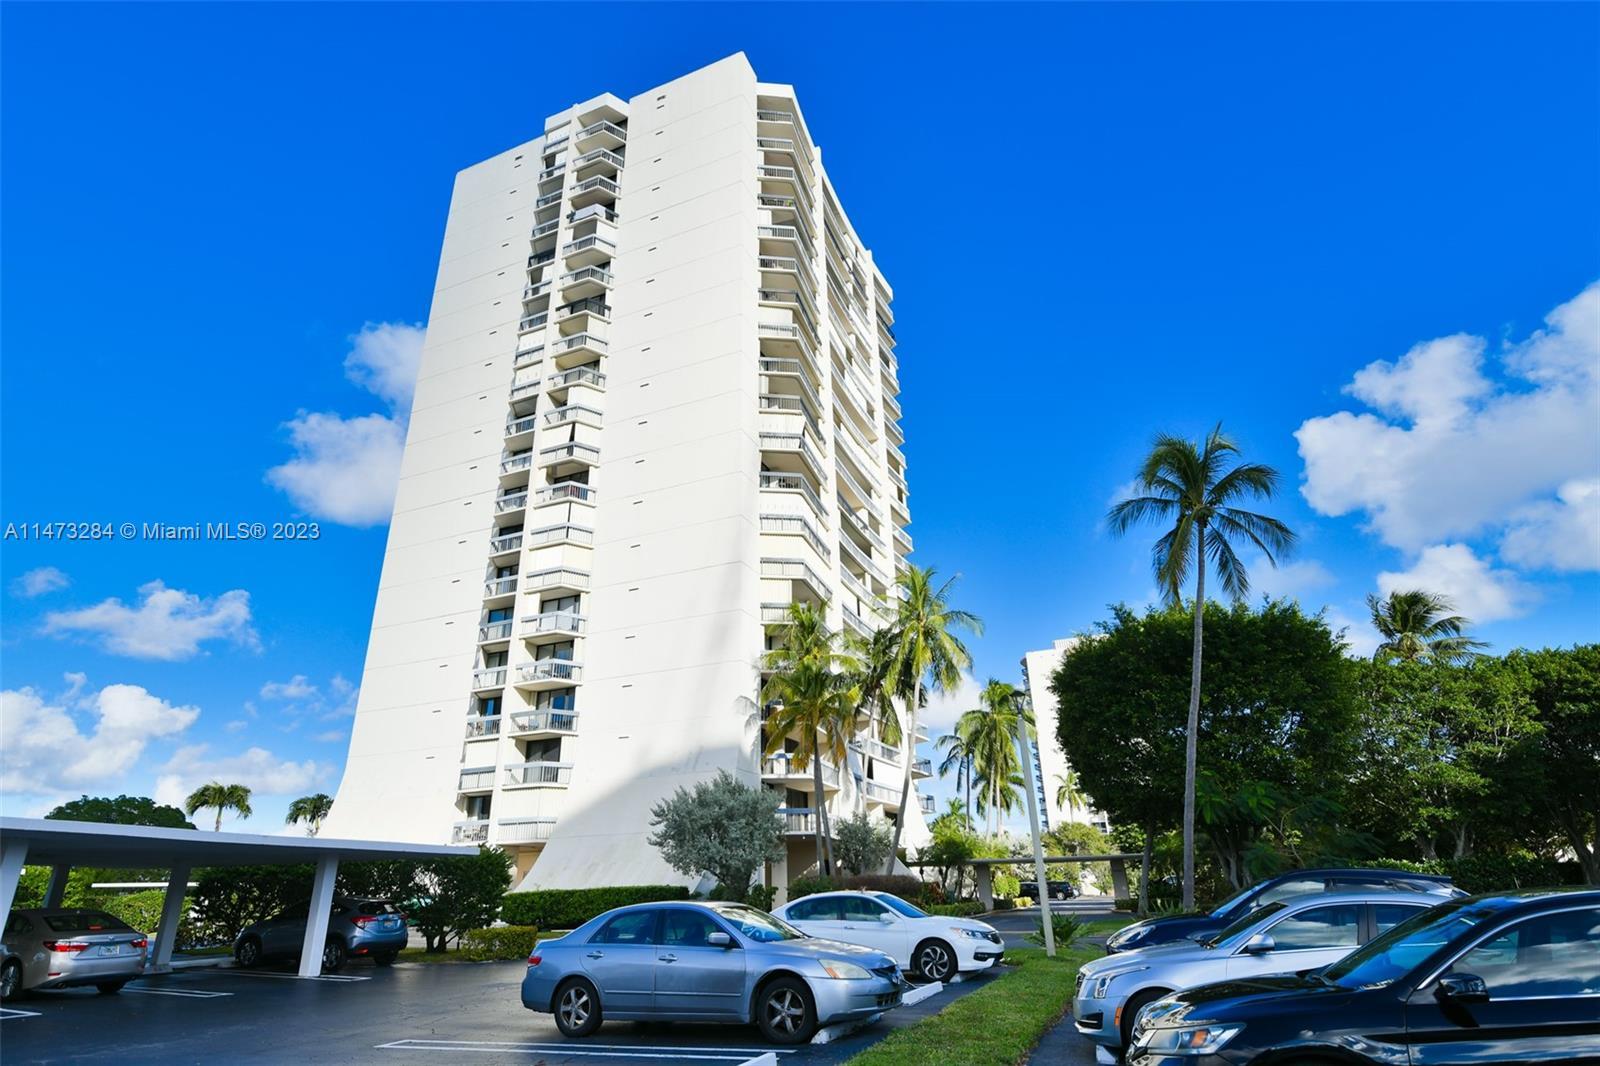 This condo is located in the prestigious gated community of Lands of the president, which offers a v